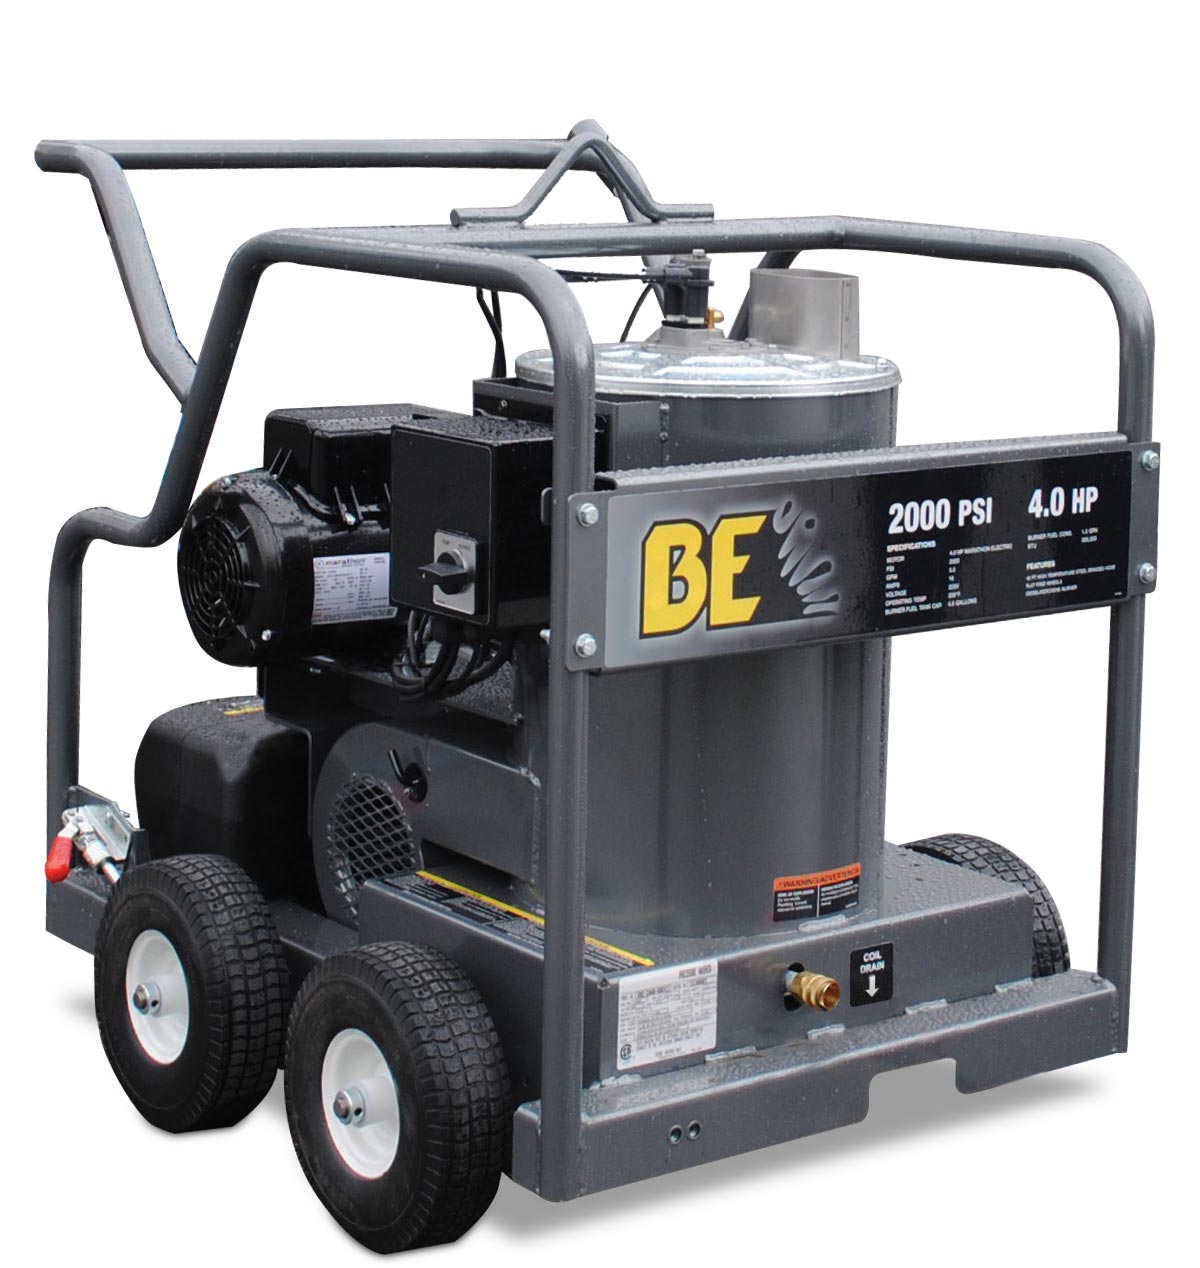 BE Pressure HW204EMD Hot Water Pressure Washer Marathon Electric Motor 2000psi 3gpm 230-240 volts Mi-T-M HSE-2003-OMG10 Limited Freight